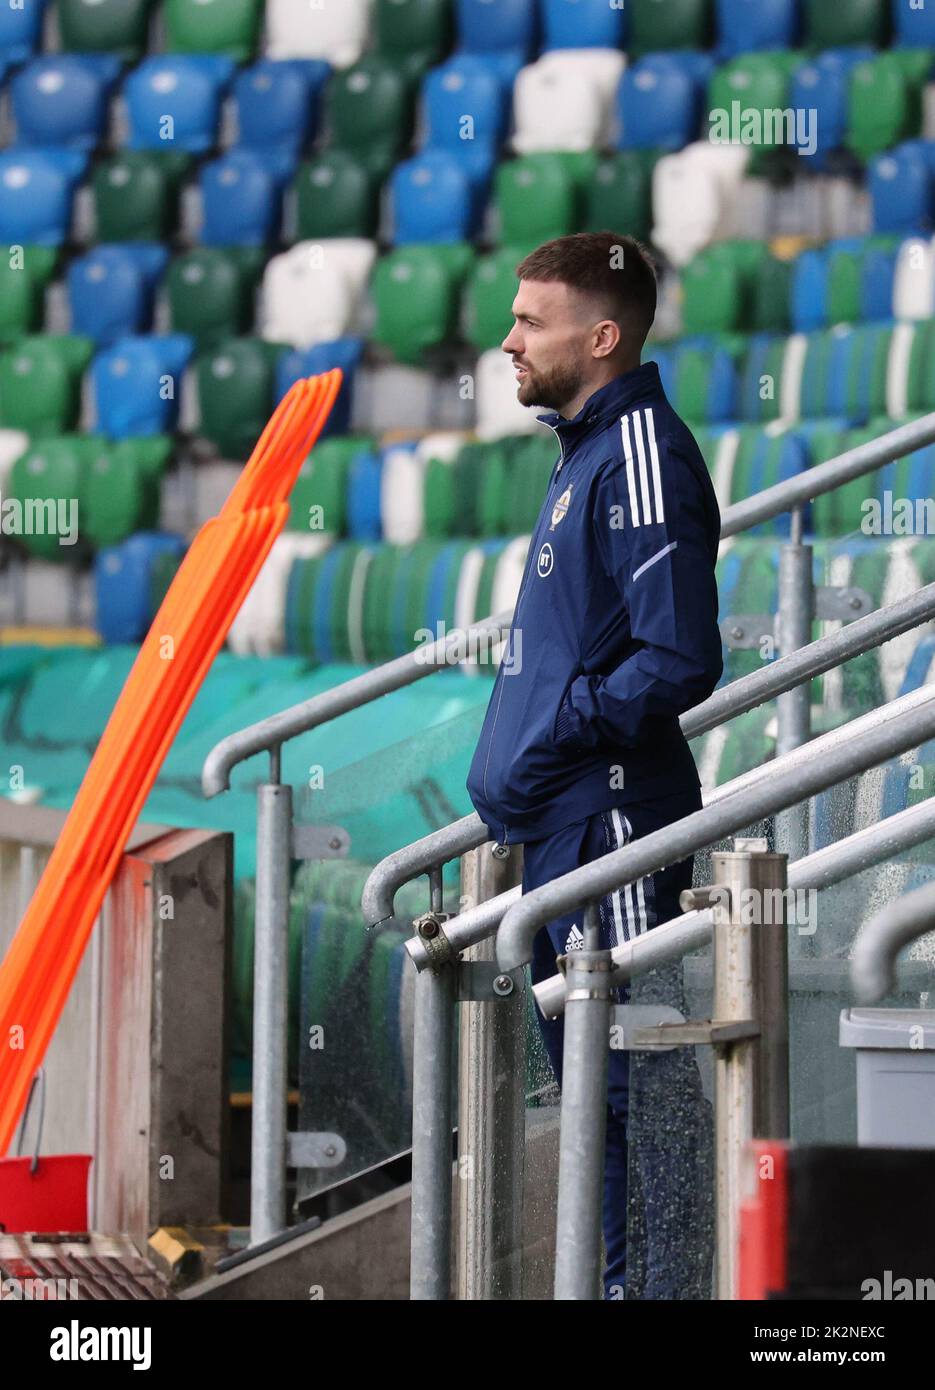 National Football Stadium at Windsor Park, Belfast, Northern Ireland, UK. 23 Sep 2022. The Northern Ireland squad train ahead of tomorrow evening's game against Kosovo. Stuart Dallas, recovering from a broken leg, watches the session. Credit: David Hunter/Alamy Live News. Stock Photo